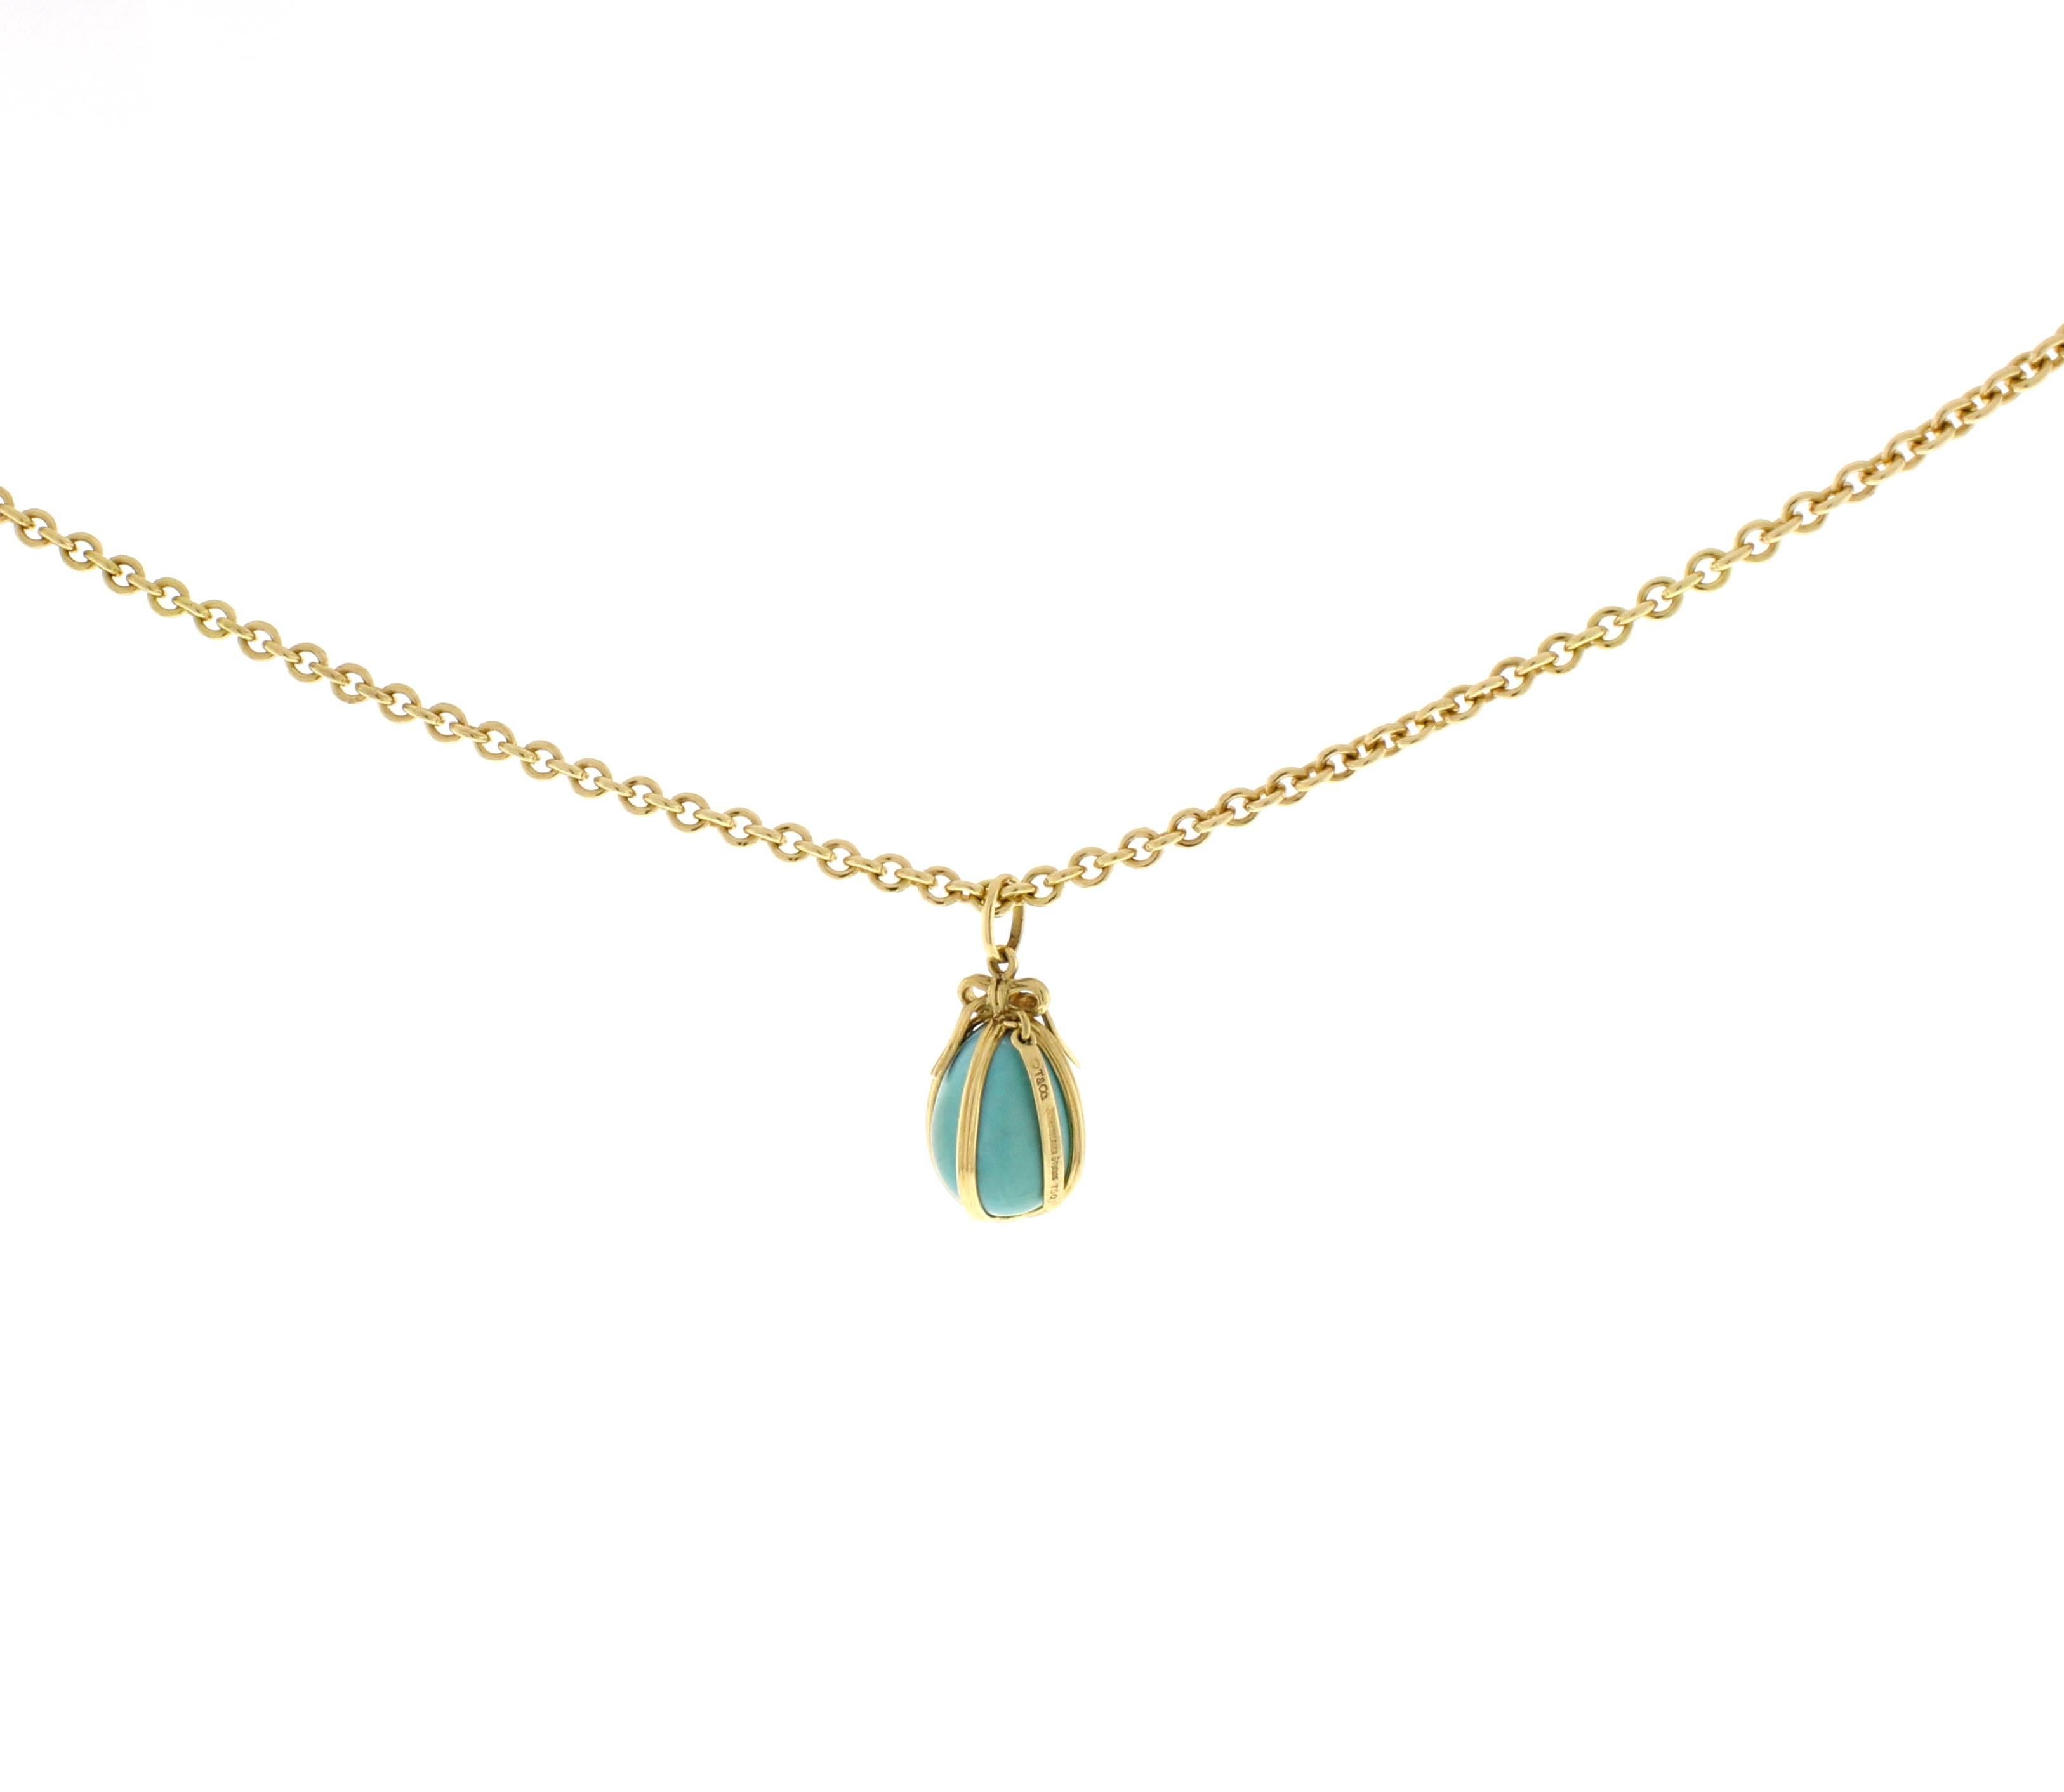 Jean Schlumberger’s visionary creations are among the world’s most intricate designs. A gold ribbon elegantly accents this delicate turquoise charm. Size small 22X13mm, 18 karat gold.  
Tiffany & Co 18kt gold 18 inch medium rolo link necklace  13.3